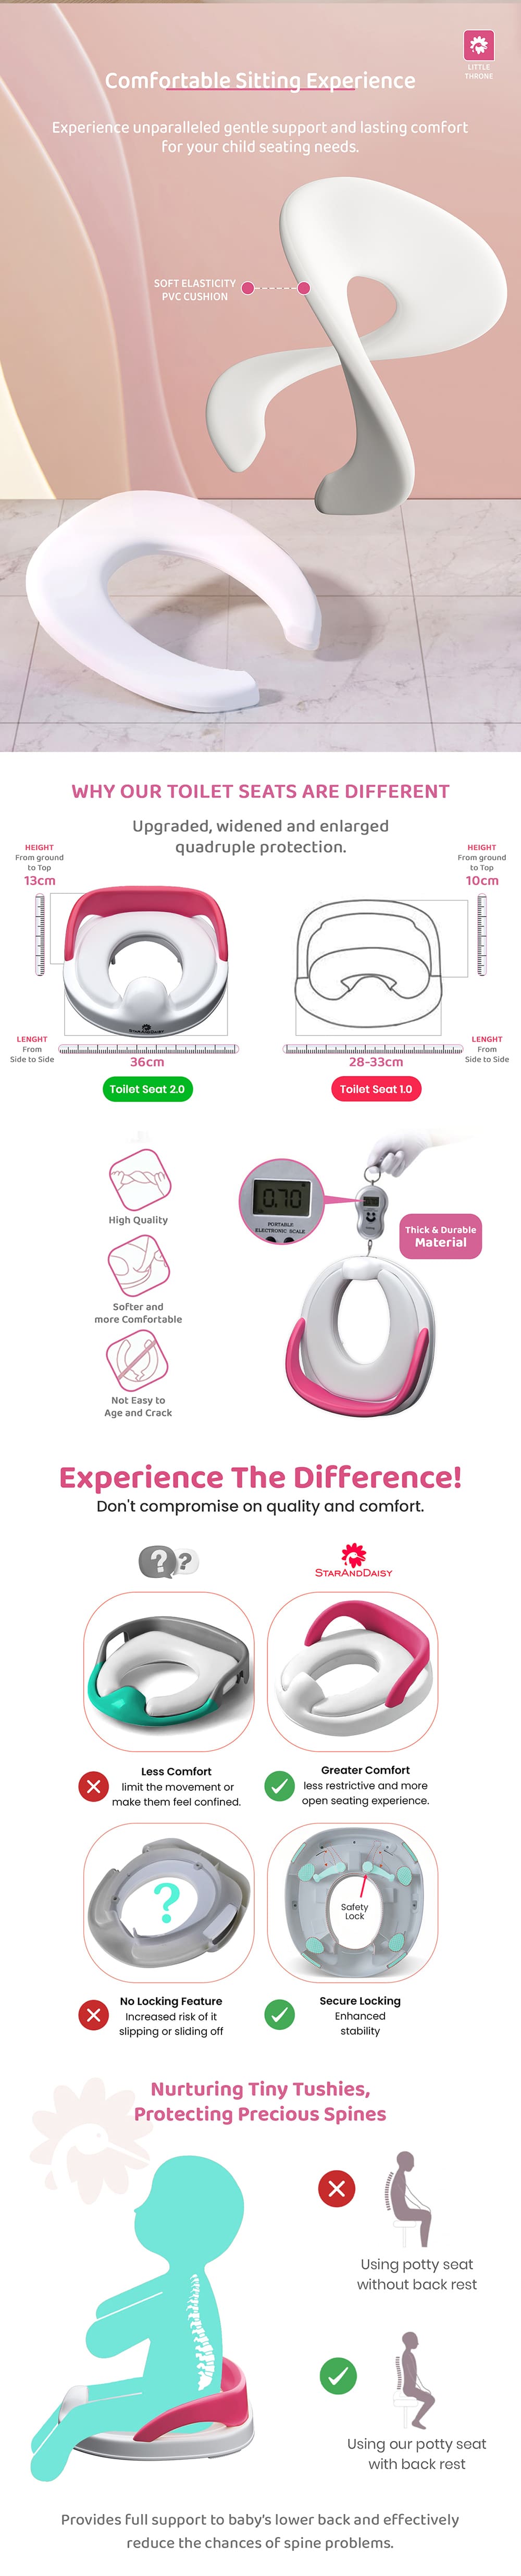 Potty Training Seat for Kids